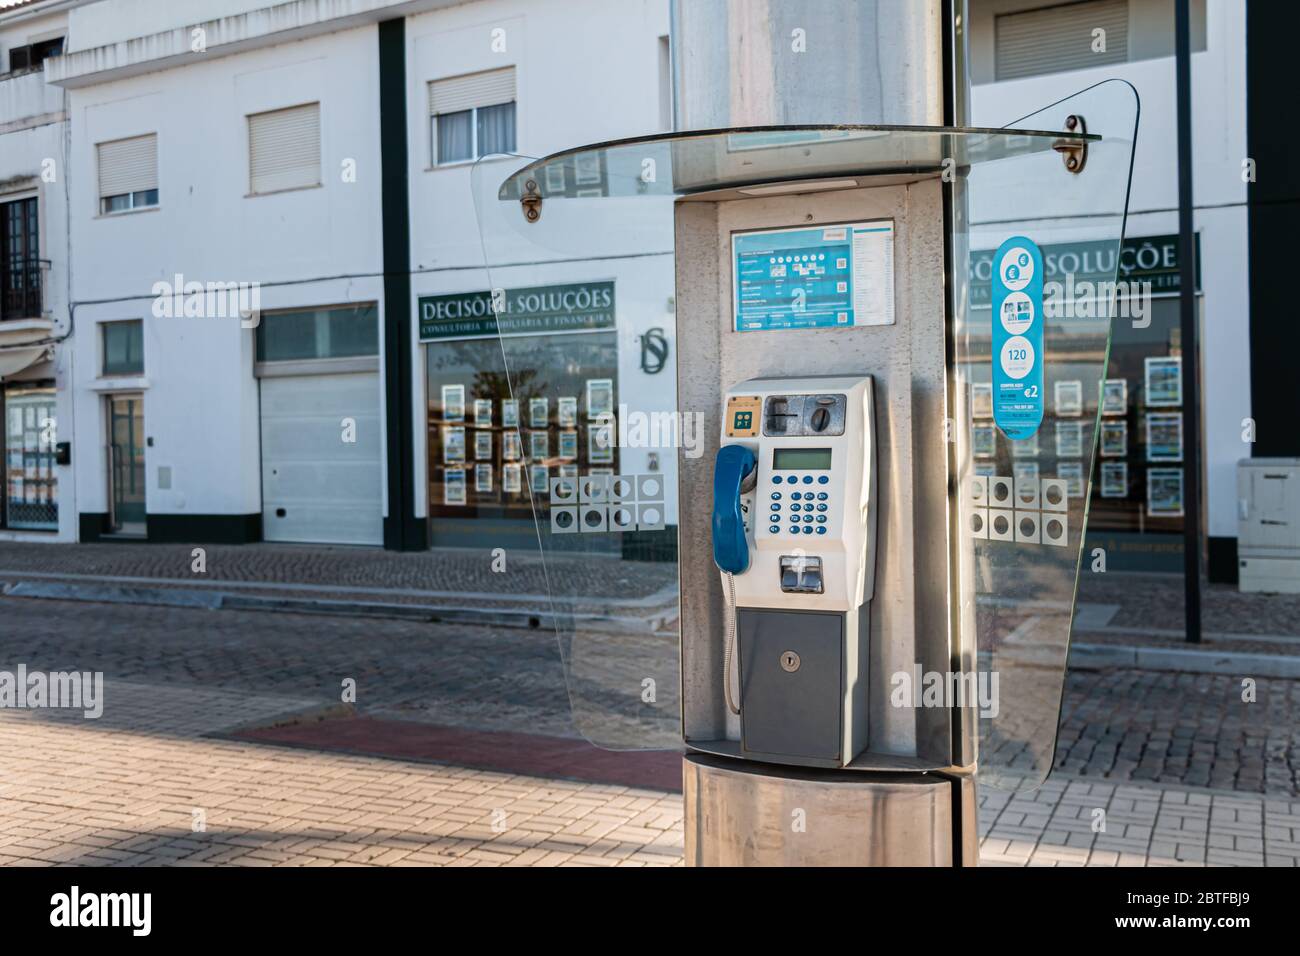 Tavira, Portugal - April 30, 2018: Old public telephone booth in the city center on a spring day Stock Photo